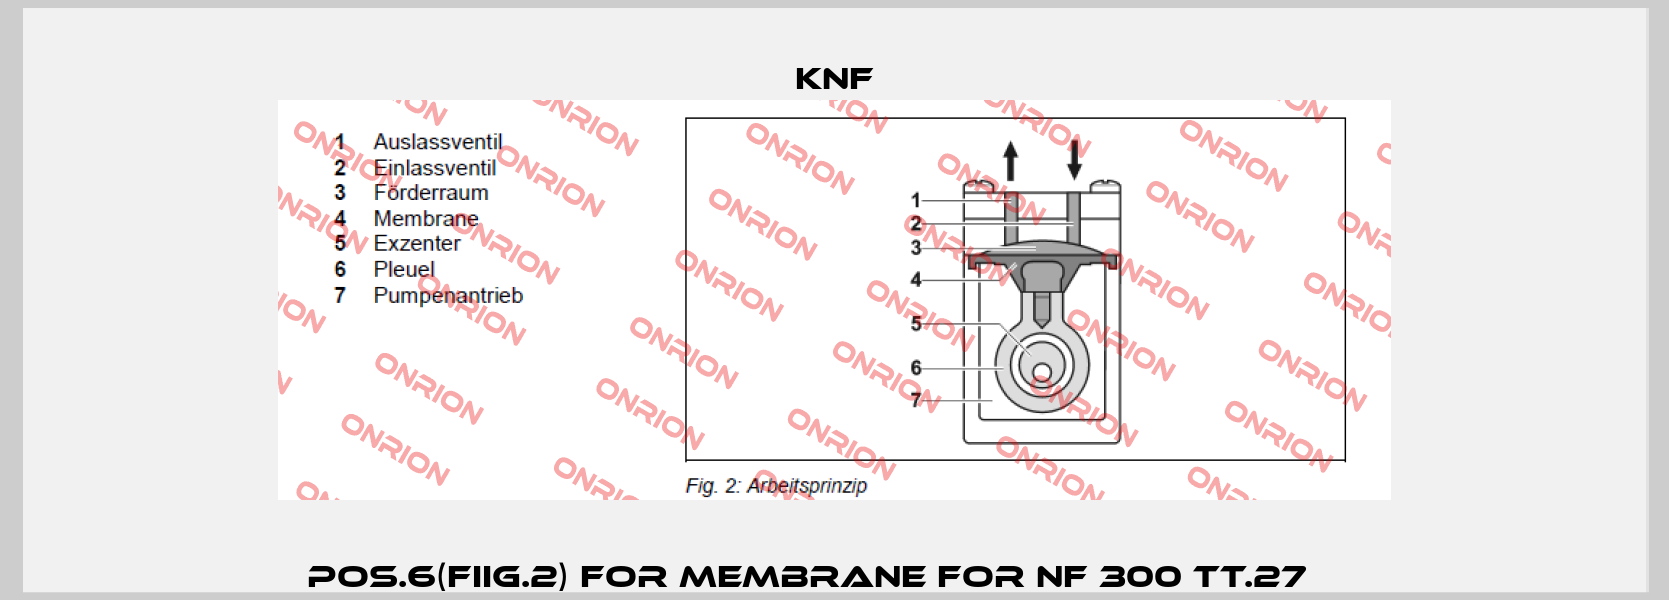 Pos.6(fiig.2) for membrane for NF 300 TT.27АА  KNF